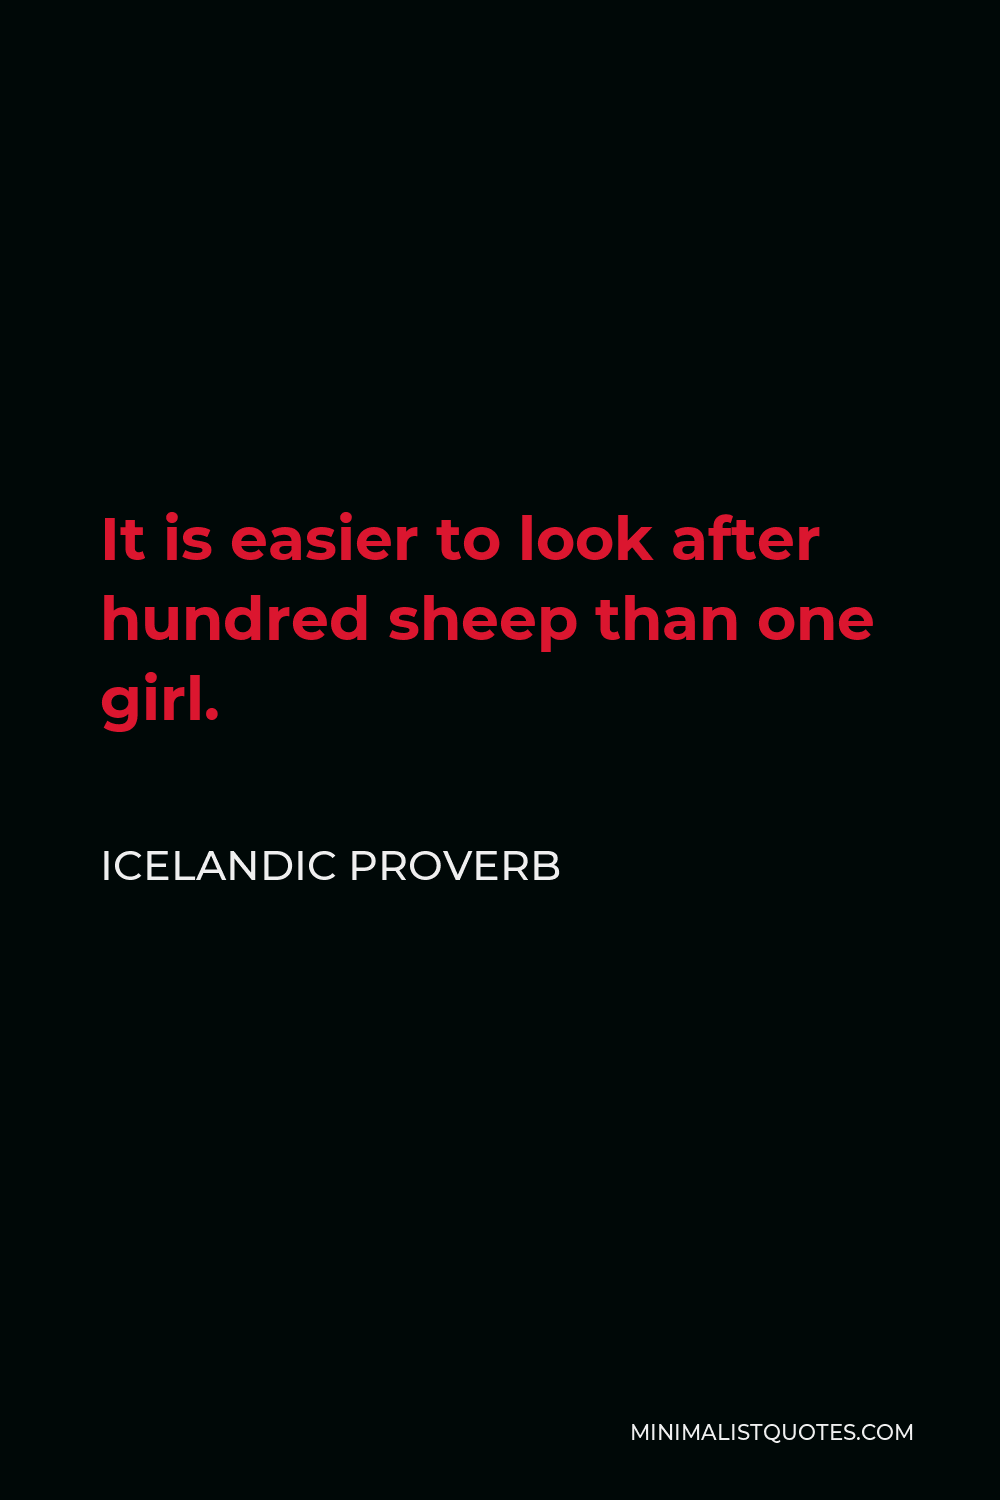 Icelandic Proverb Quote - It is easier to look after hundred sheep than one girl.